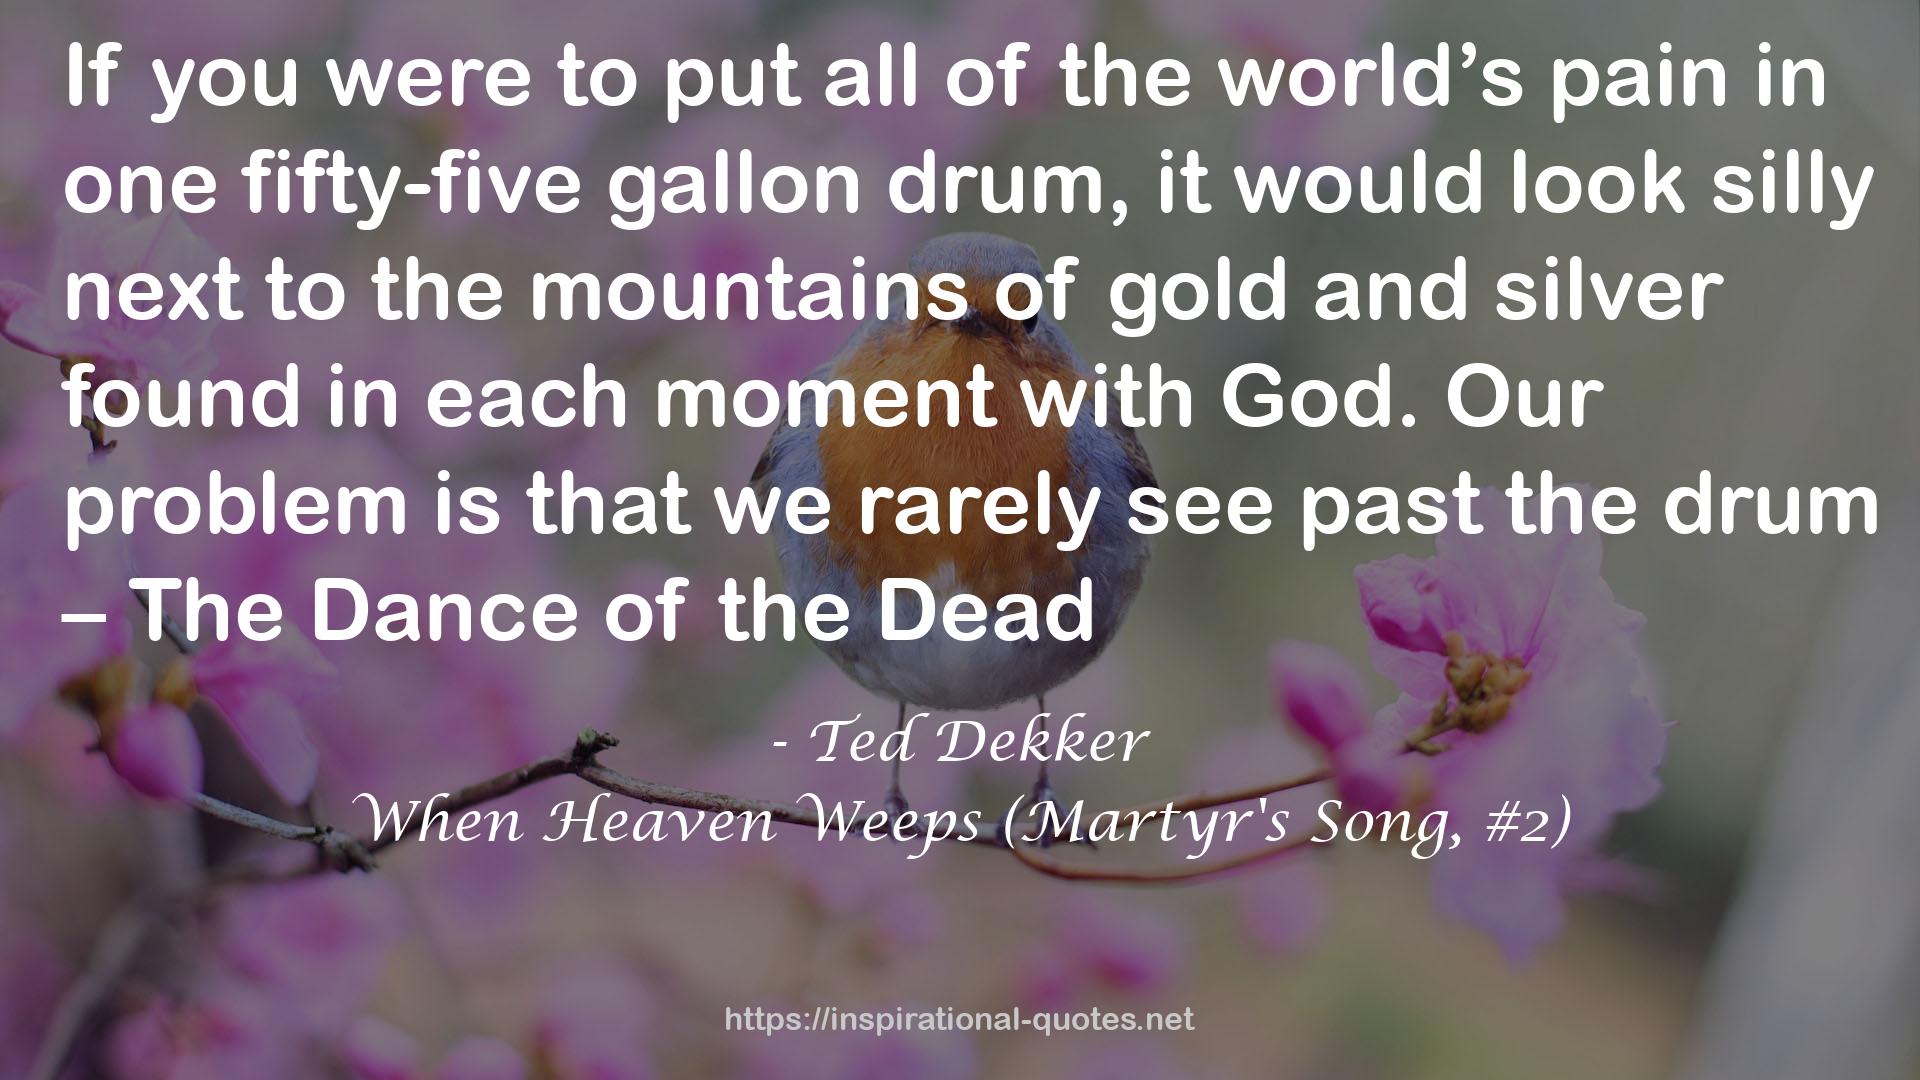 When Heaven Weeps (Martyr's Song, #2) QUOTES